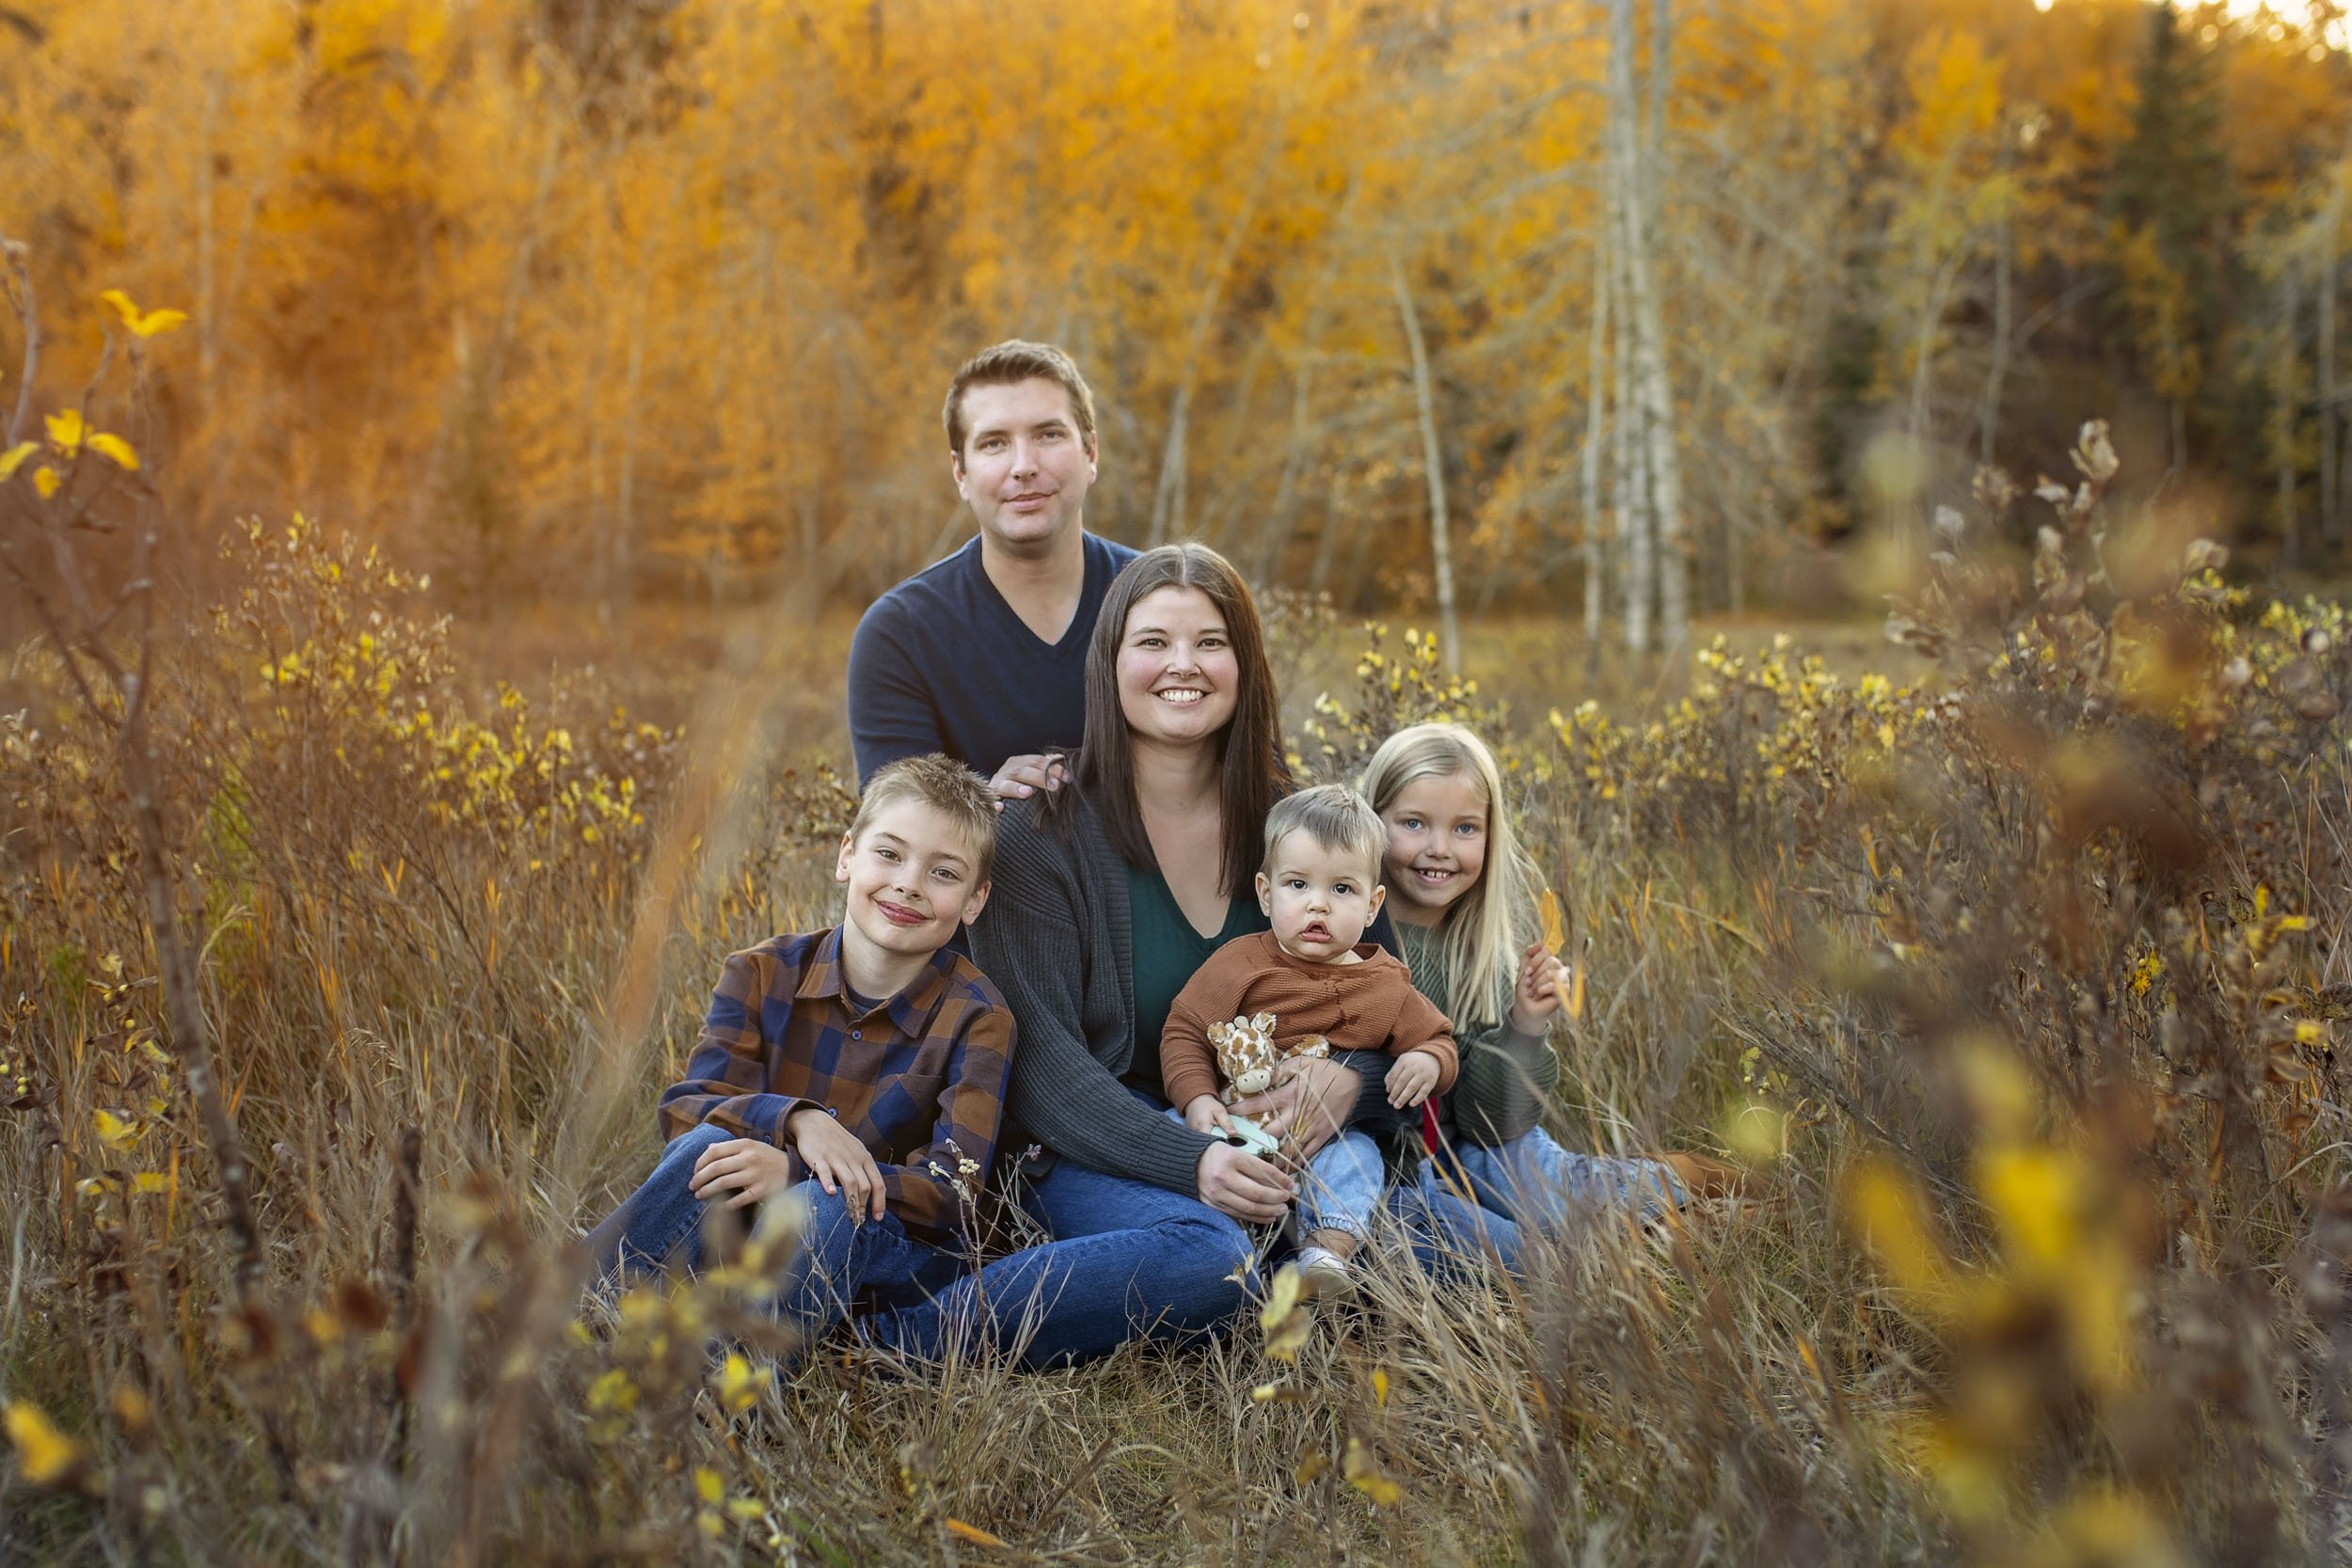 Lace and locket photo Airdrie Calgary Family Photographer-88.jpg